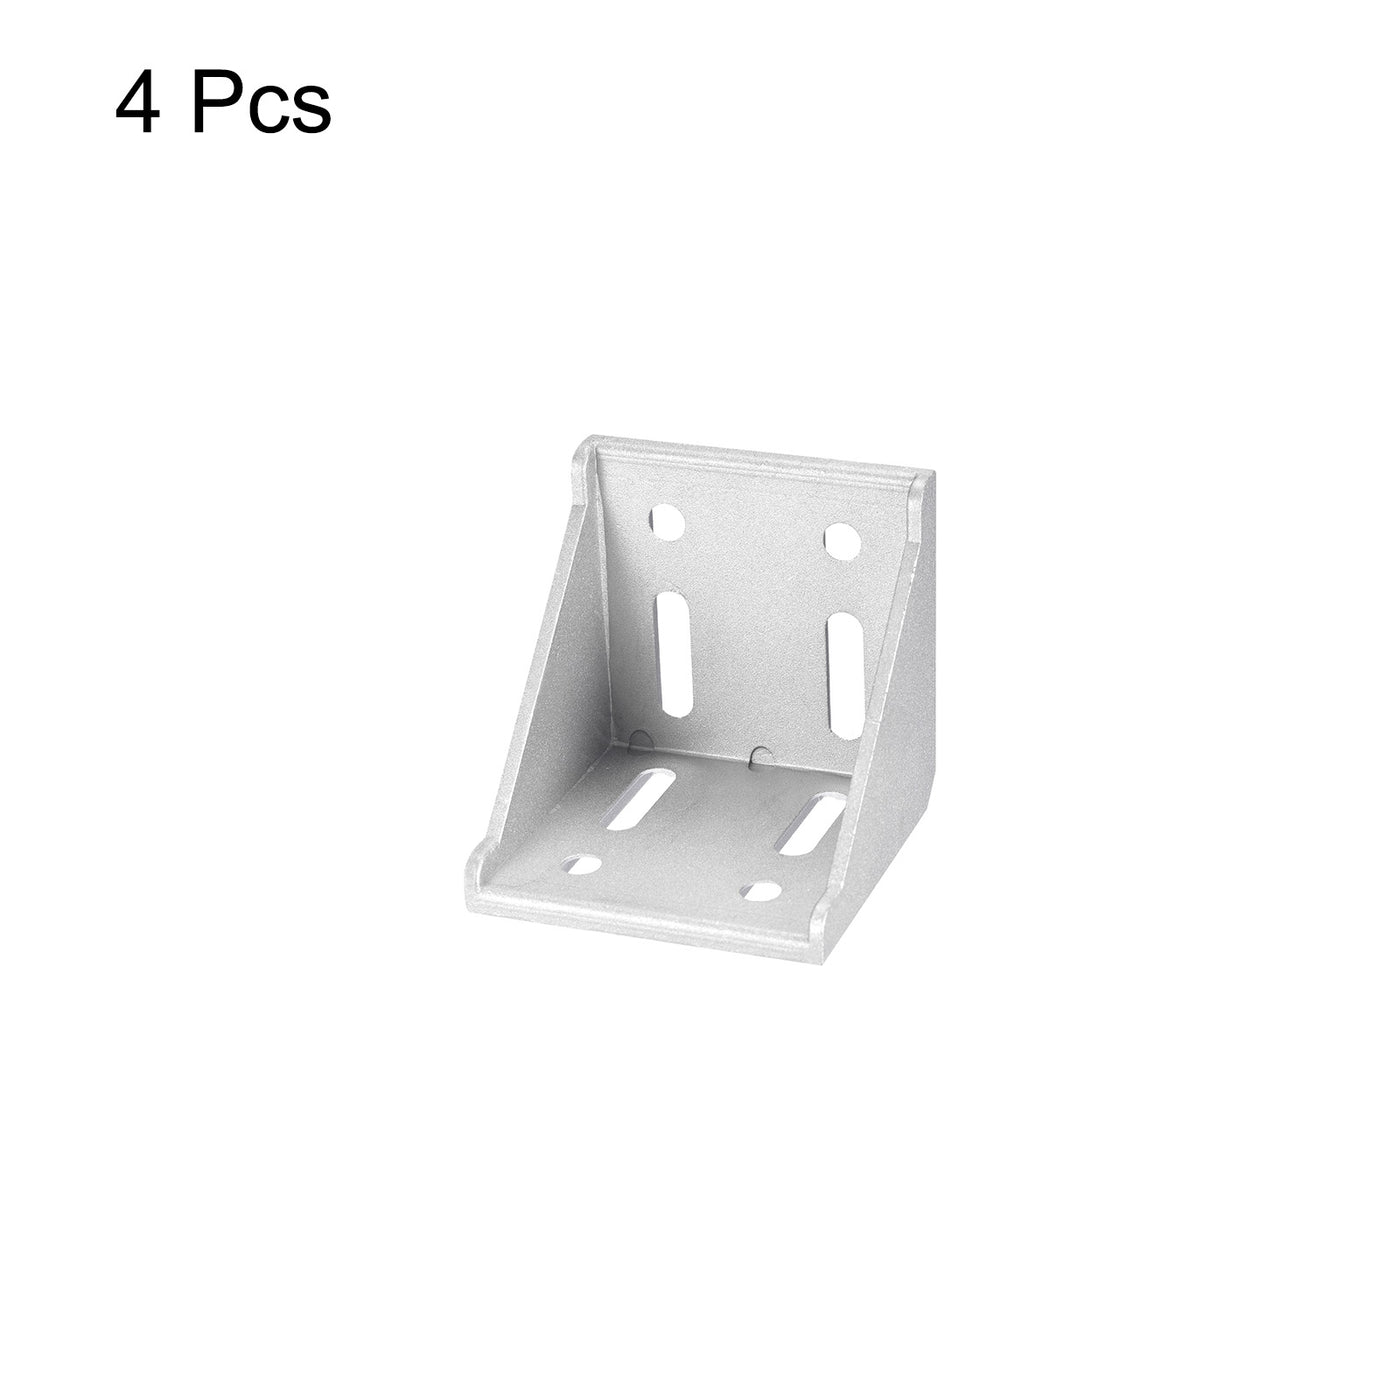 uxcell Uxcell 4Pcs Inside Corner Bracket Gusset, 78x78x79mm 8080 Angle Connectors for 4080/8080 Series Aluminum Extrusion Profile Silver